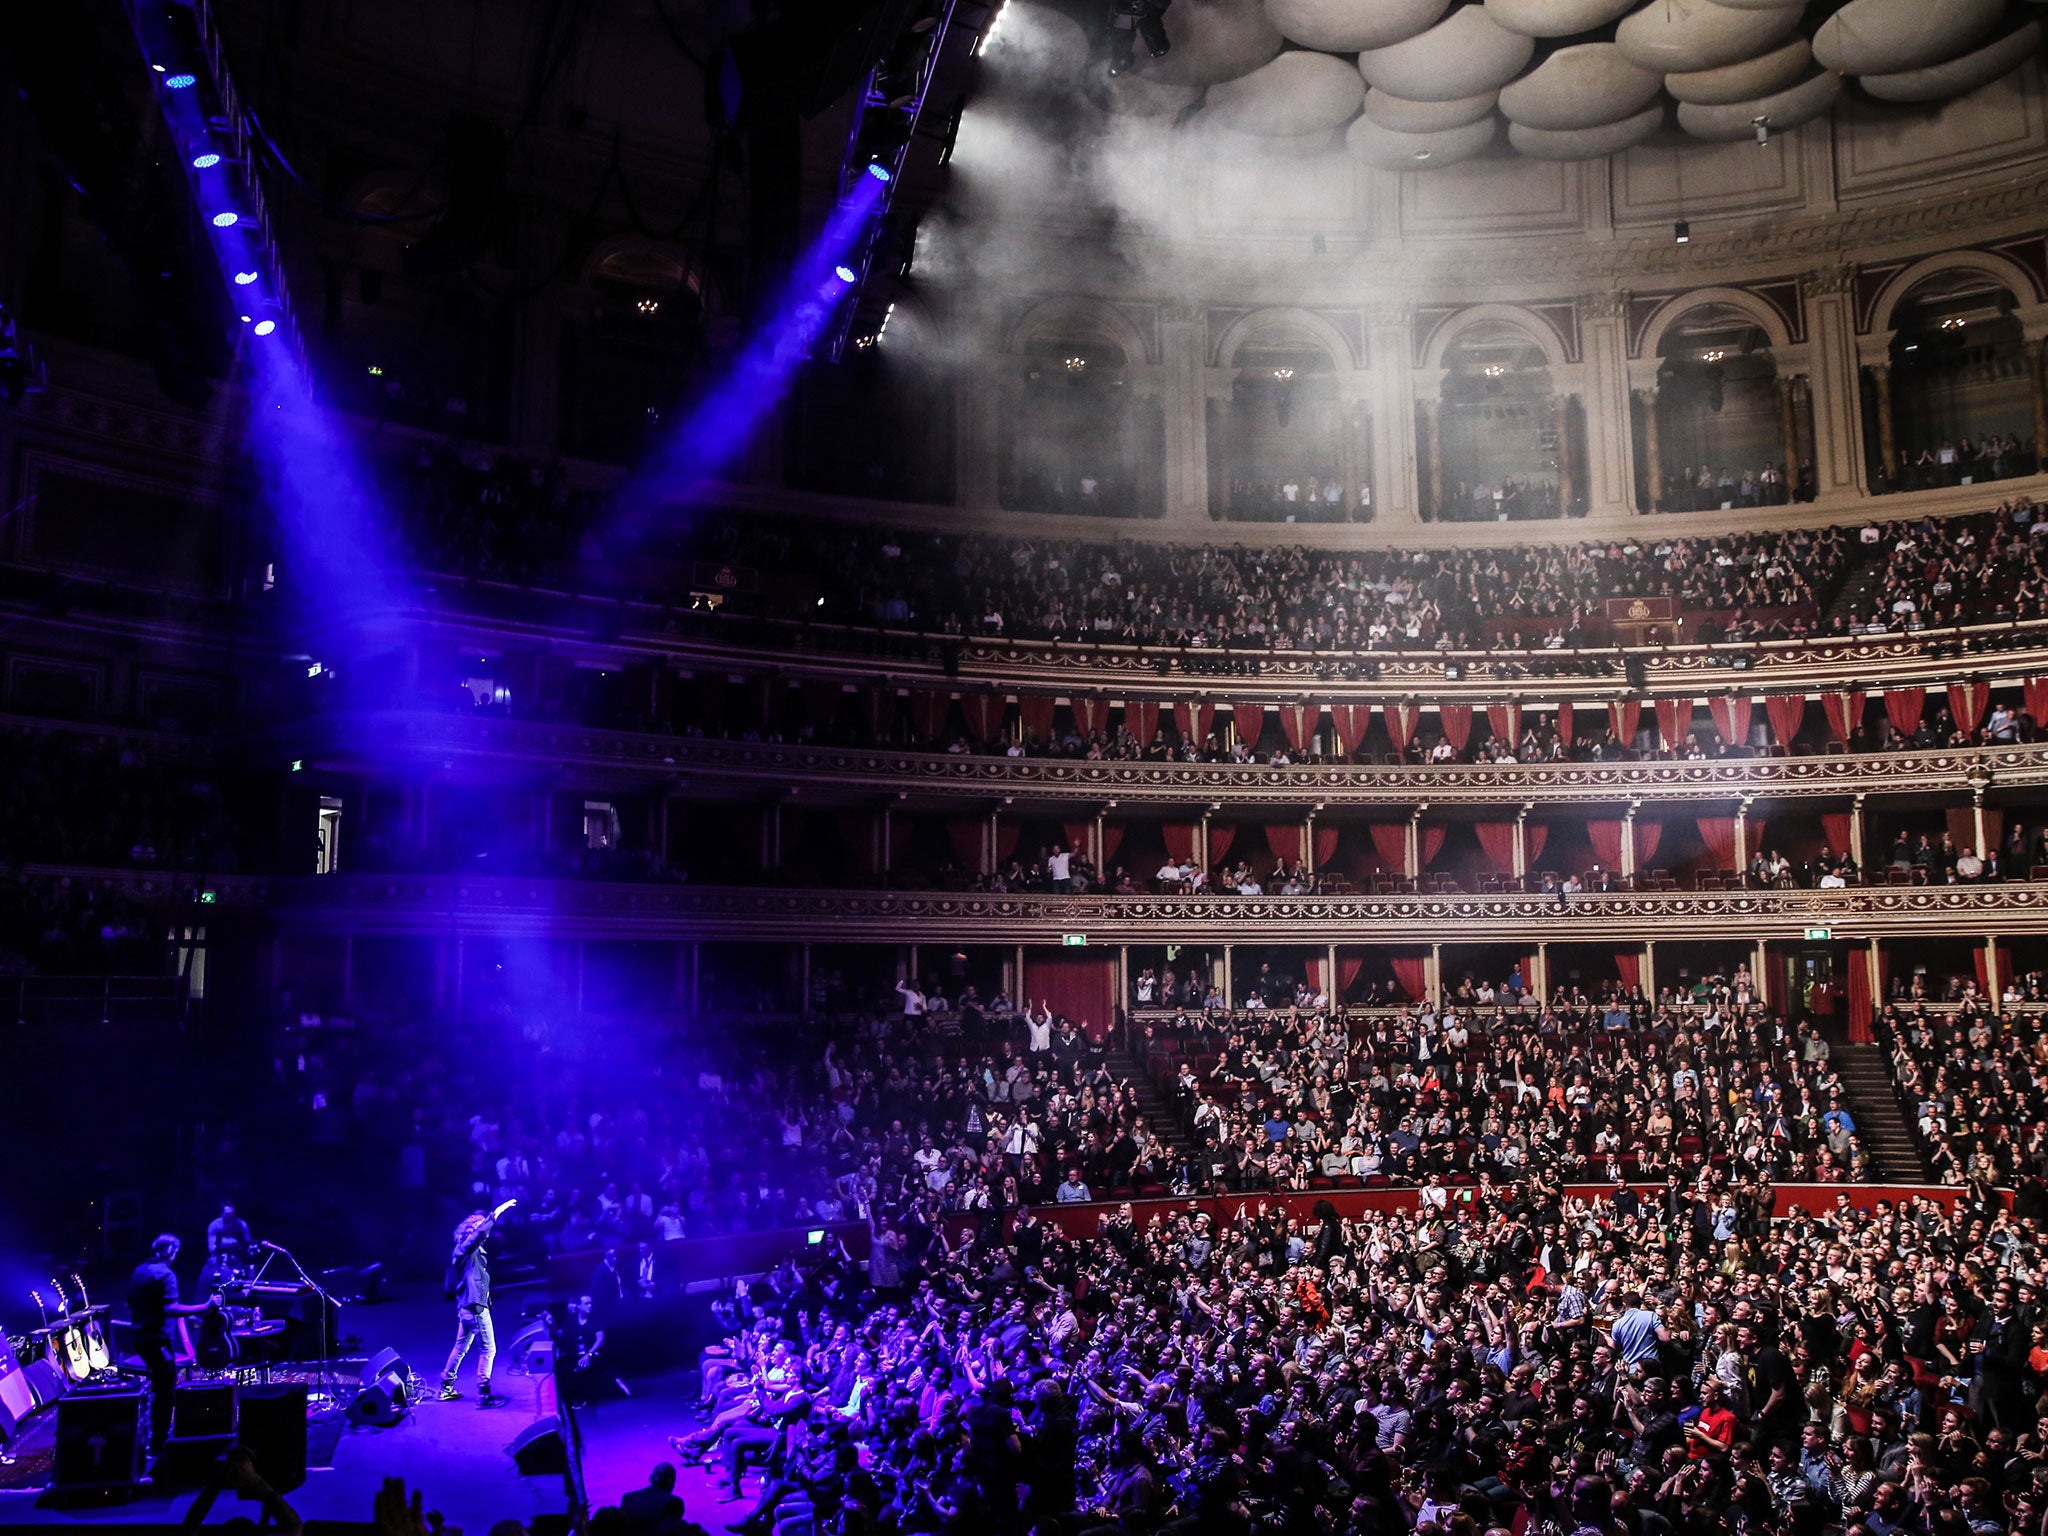 Chris Cornell performs on stage at the Royal Albert Hall